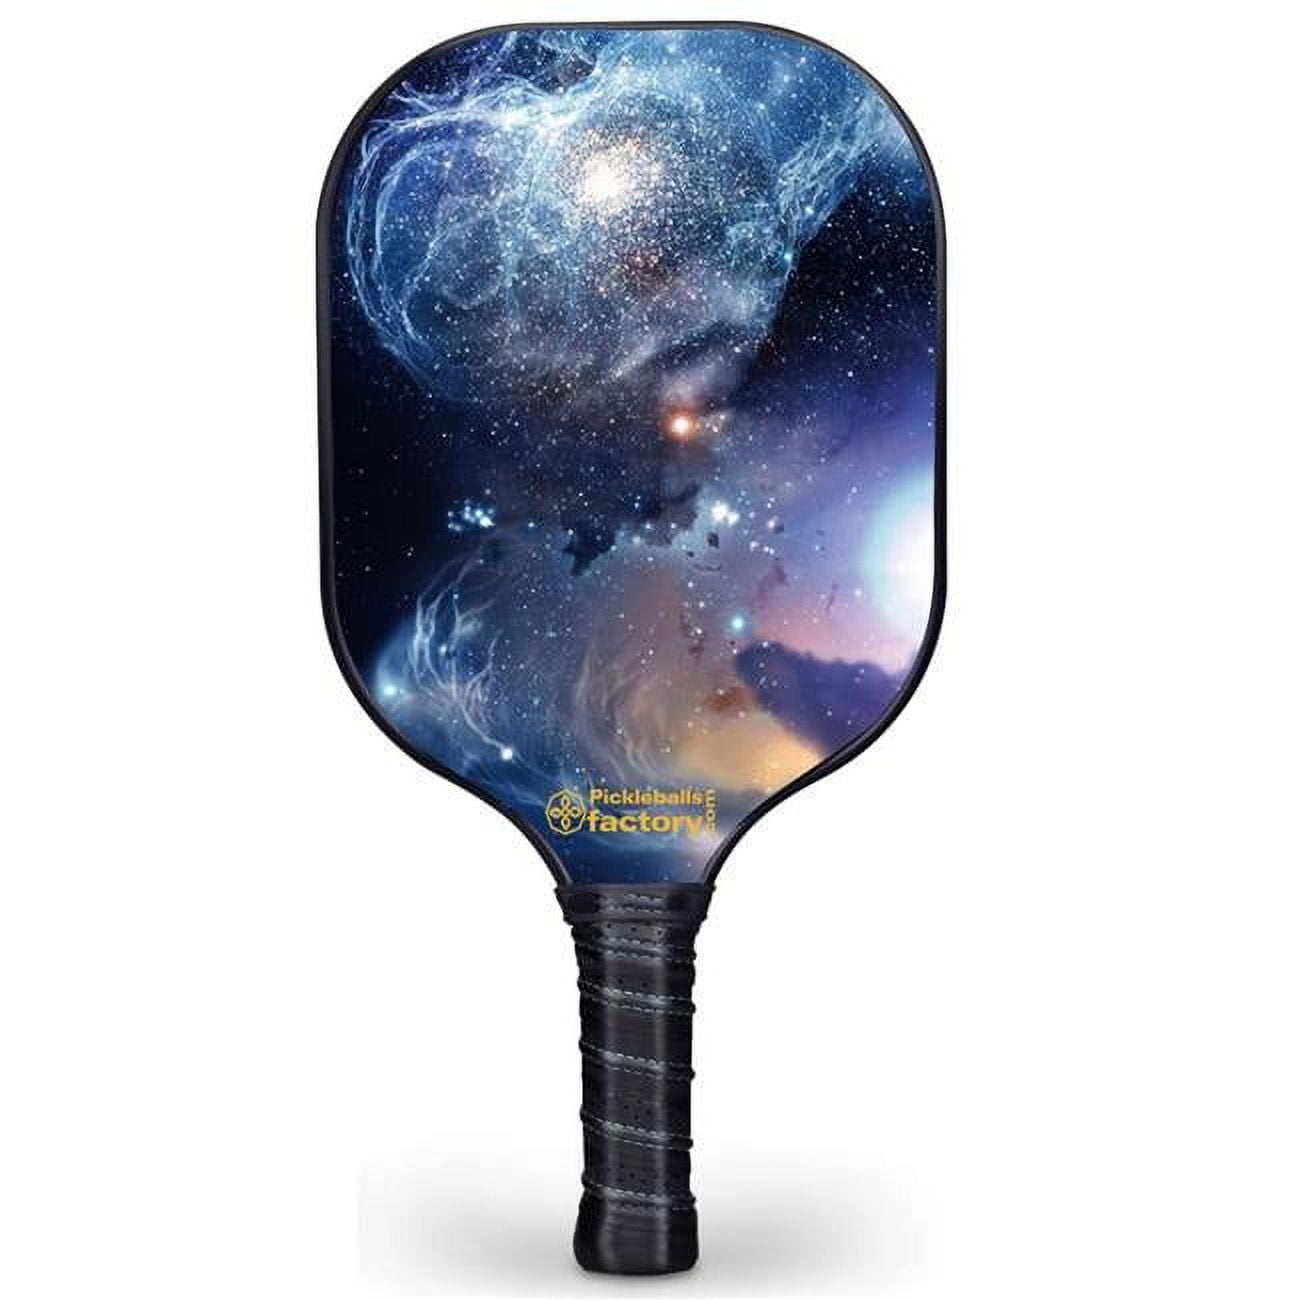 Best Pickleball Paddle - The Milky Way Most Expensive Pickleball Paddle ...